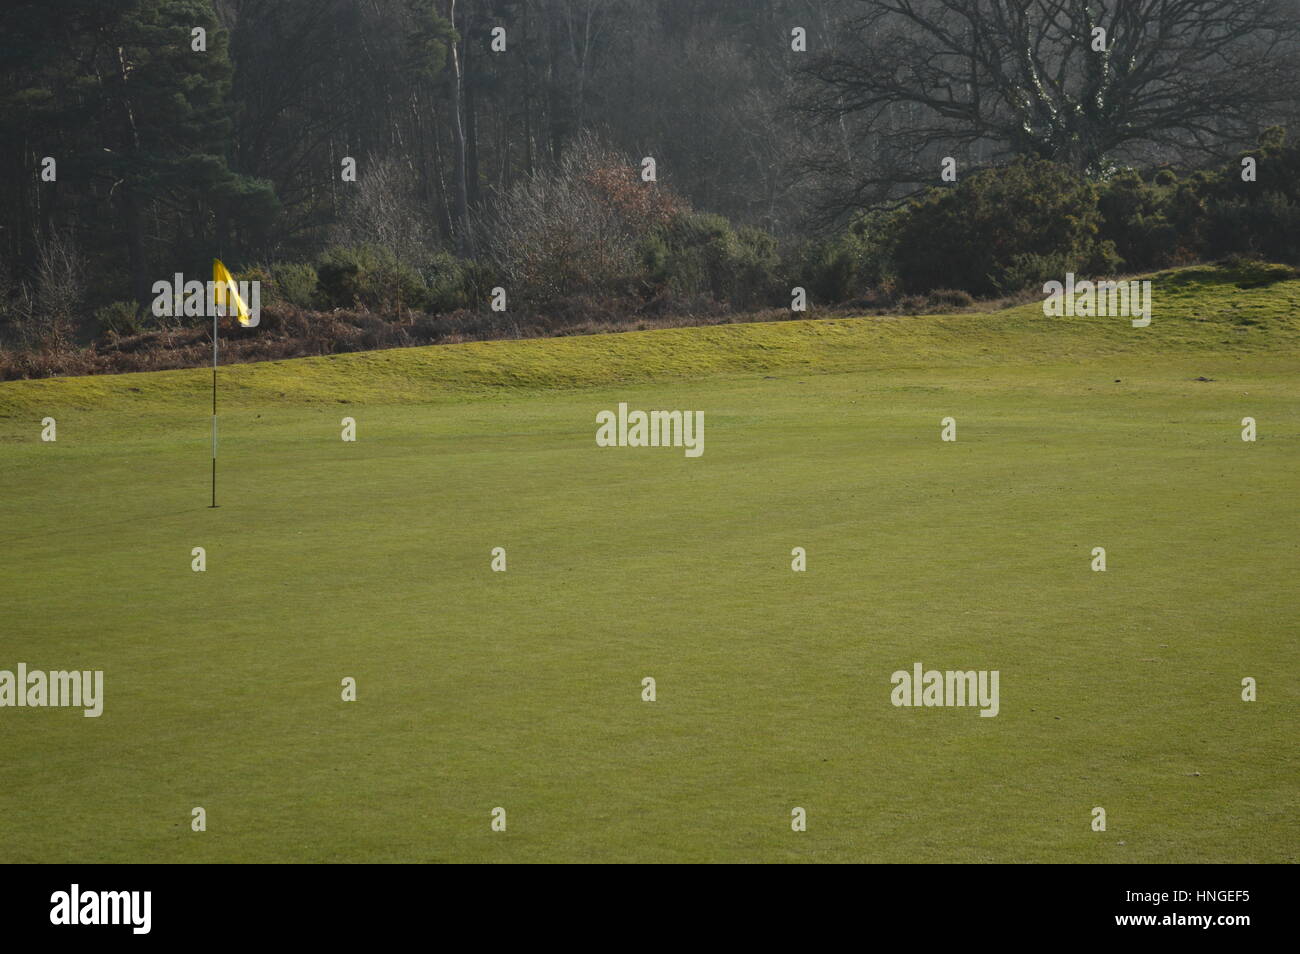 A putting green and flag at Reigate Hill Golf Club, Surrey, UK Stock Photo